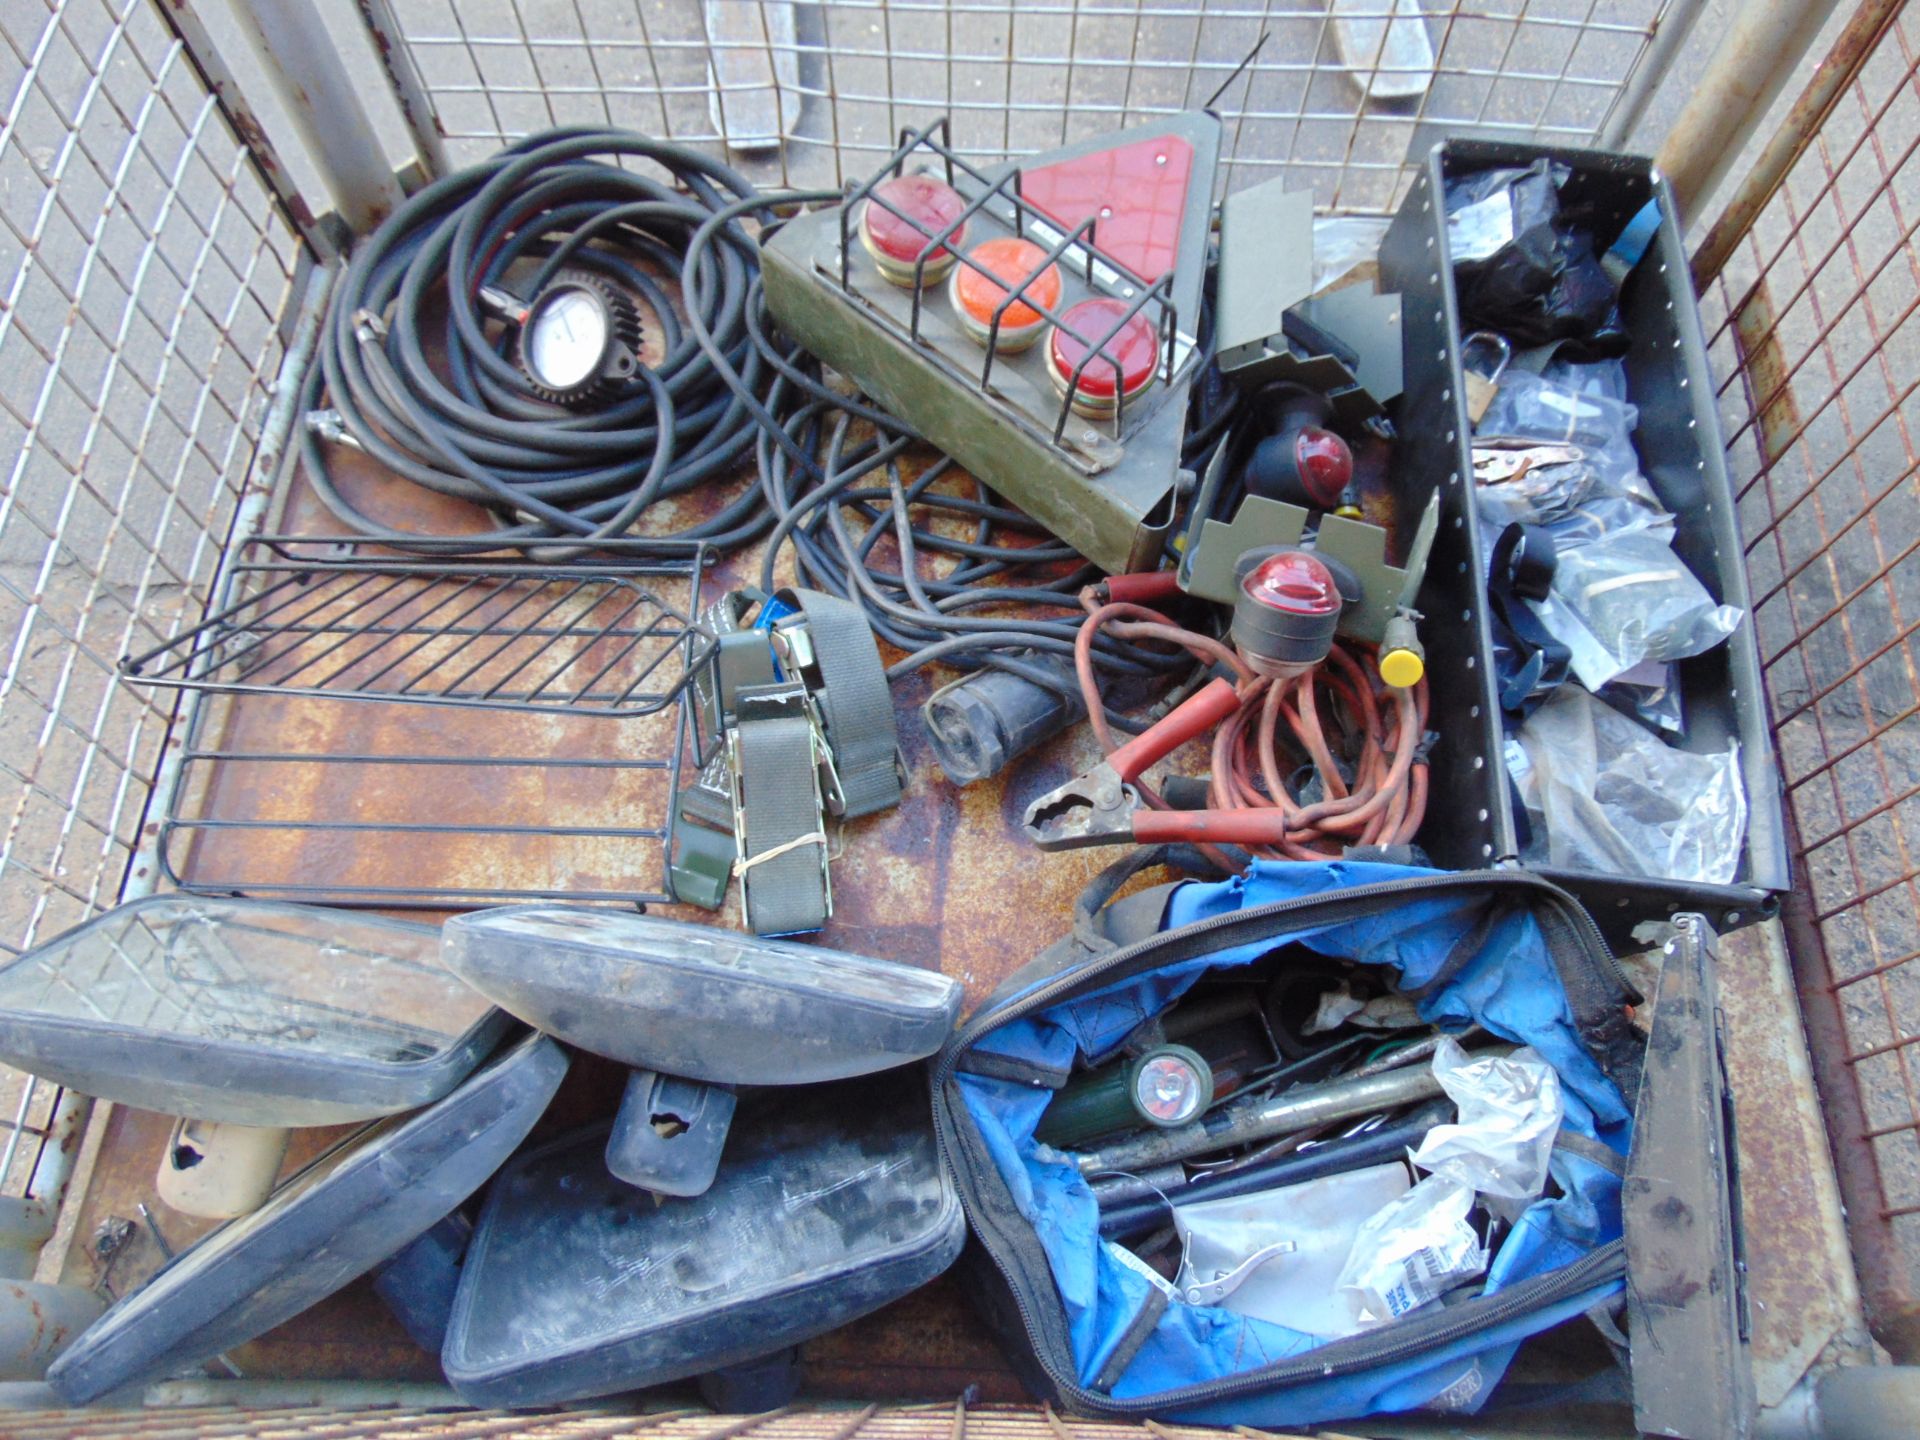 1 x Stillage Recovery Equipment Trailer Lights, Tyre Inflator, Mirrors etc